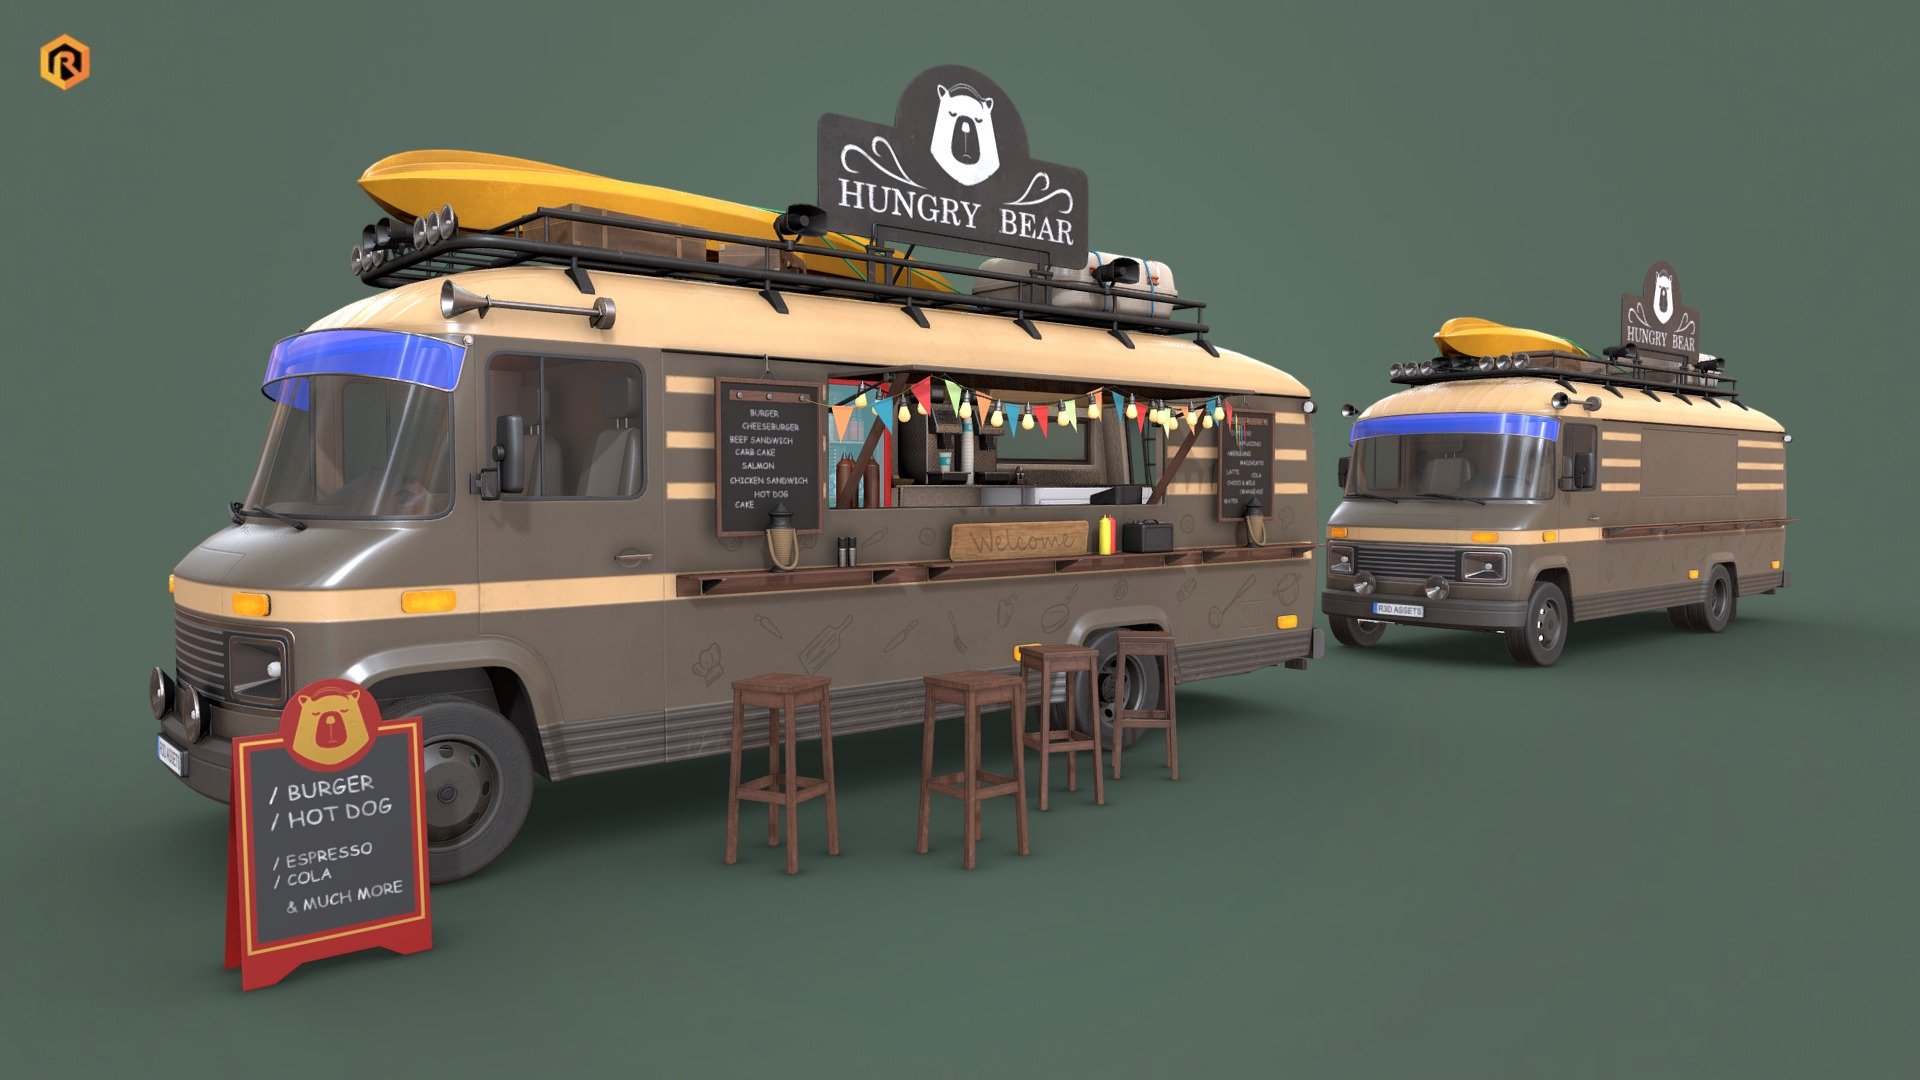 Low-poly PBR 3D model of Food Truck with an additional chairs. 

There is open and closed version of this 3D model included on product page.

You can also get this model in a collection: https://skfb.ly/oJyQt

This model is best for use in games and other VR/AR, real-time applications such as Unity or Unreal Engine. It can also be rendered in Blender (ex Cycles) or Vray as the model is equipped with all required PBR textures.  

Technical details:




5 PBR textures sets (Main Body, Items, Emission, Alpha and Interior) 

58699 Triangles

The model is divided into few objects like main body, wheels, chairs, doors etc.

Lot of additional file formats included (Blender, Unity, UE4, Maya etc.)  

More file formats are available in additional zip file on product page (See all files)

Please feel free to contact me if you have any questions or need any support for this asset.

Support e-mail: support@rescue3d.com - Hipster Food Truck | Low-poly PBR 3D Model - Buy Royalty Free 3D model by Rescue3D Assets (@rescue3d) 3d model